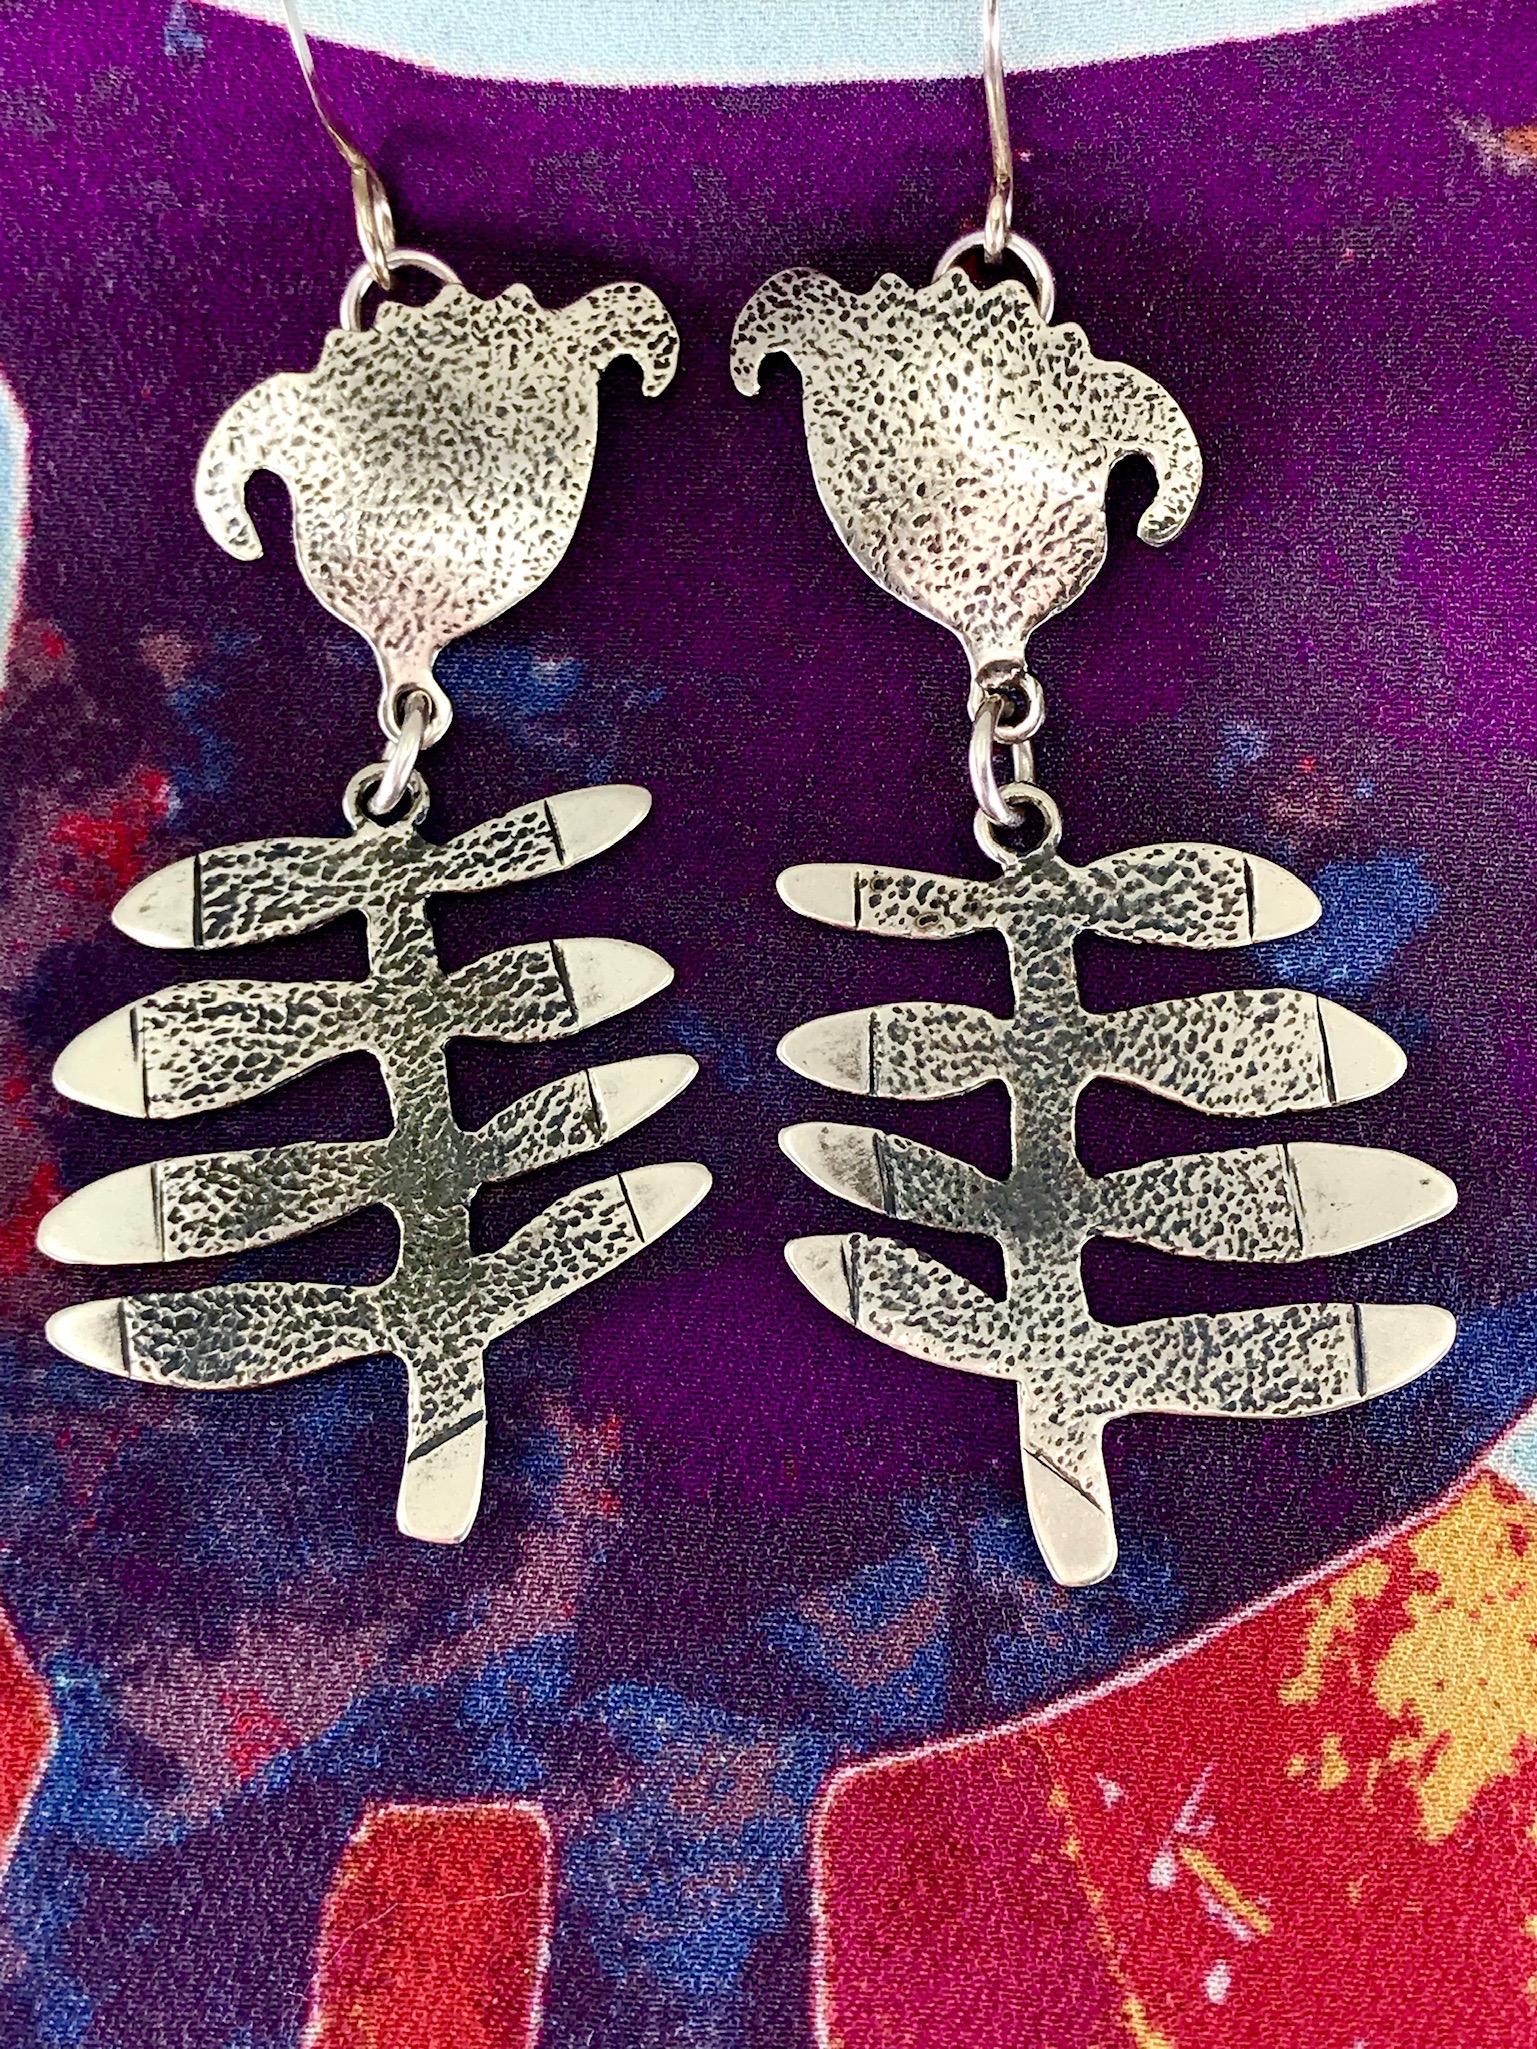 Flowers, cast sterling silver dangle earrings Melanie Yazzie Navajo new, flowers

Melanie A. Yazzie (Navajo-Diné) is a highly regarded multimedia artist known for her printmaking, paintings, sculpture, and jewelry designs.  

She has exhibited,